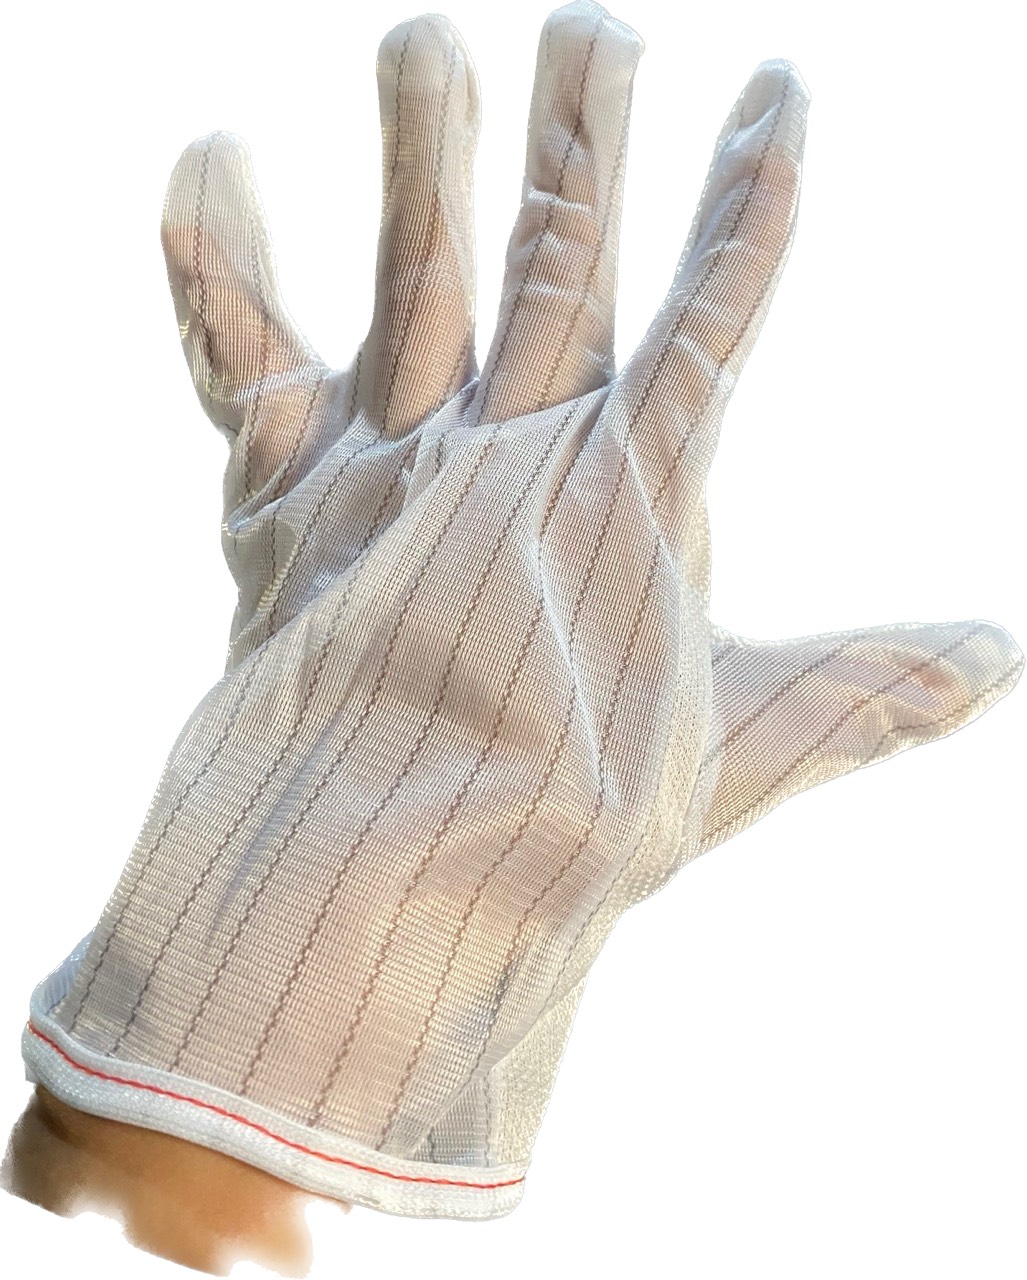 (ESD Glove) Poly Fabric with Carbon yarn